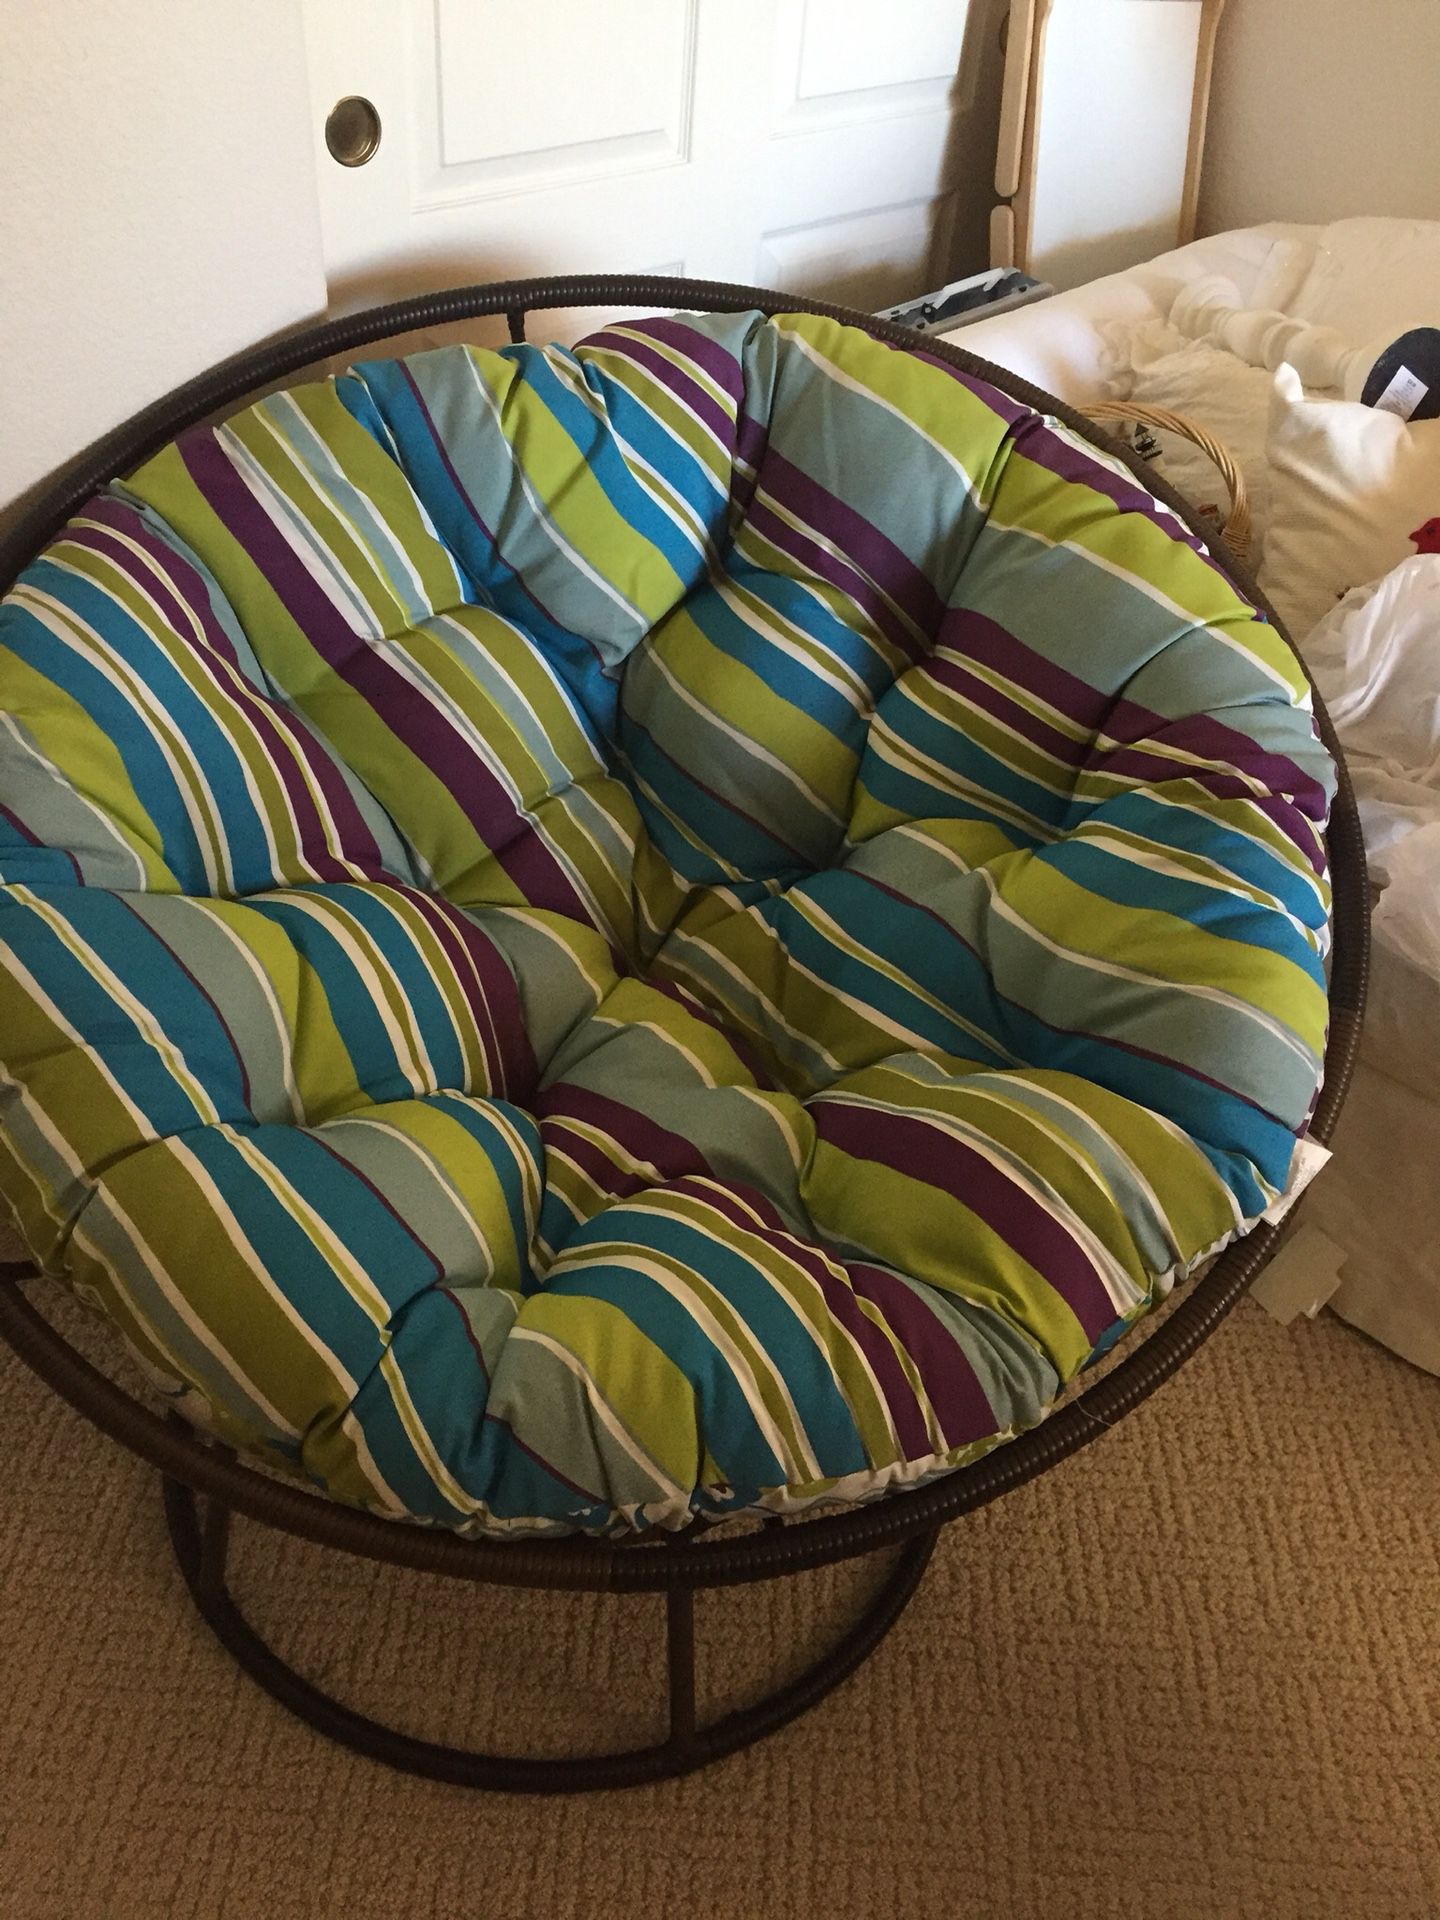 Cushion Only brand New Papasan cushion from Pier1 Cushion Only